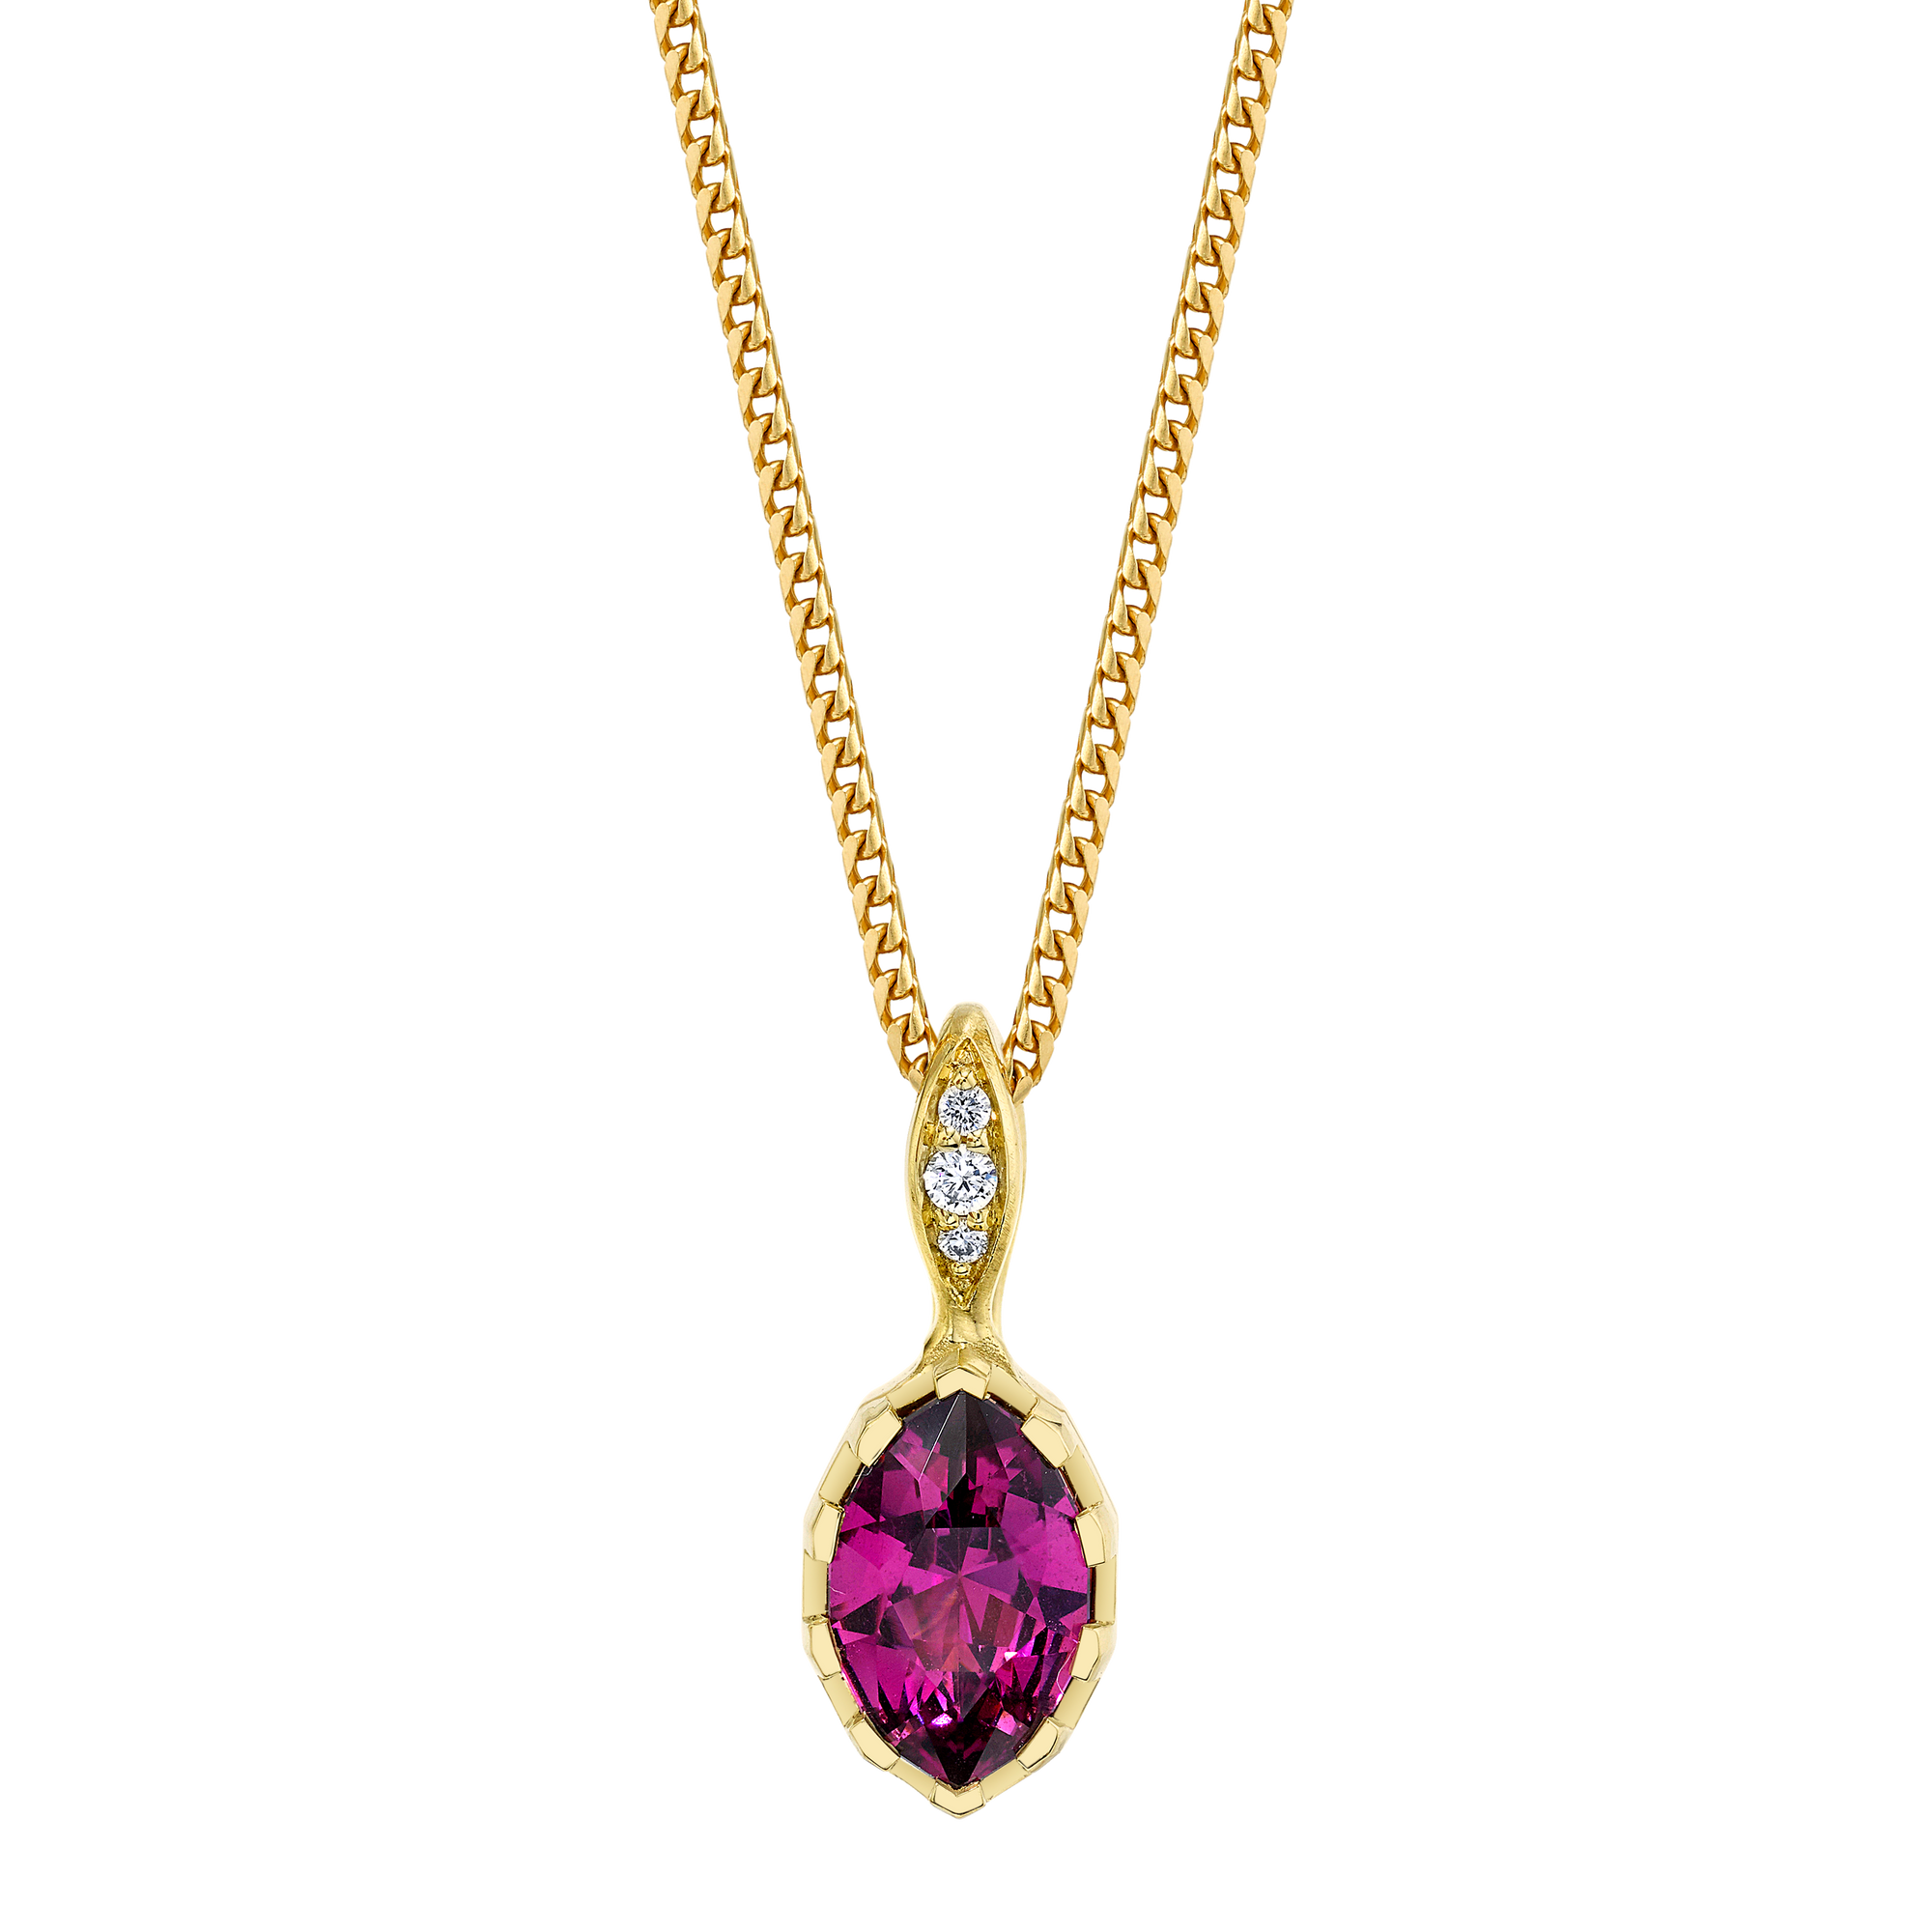 Modern Oval Necklace Featuring Precision-cut Pink Garnet with Diamond Pave